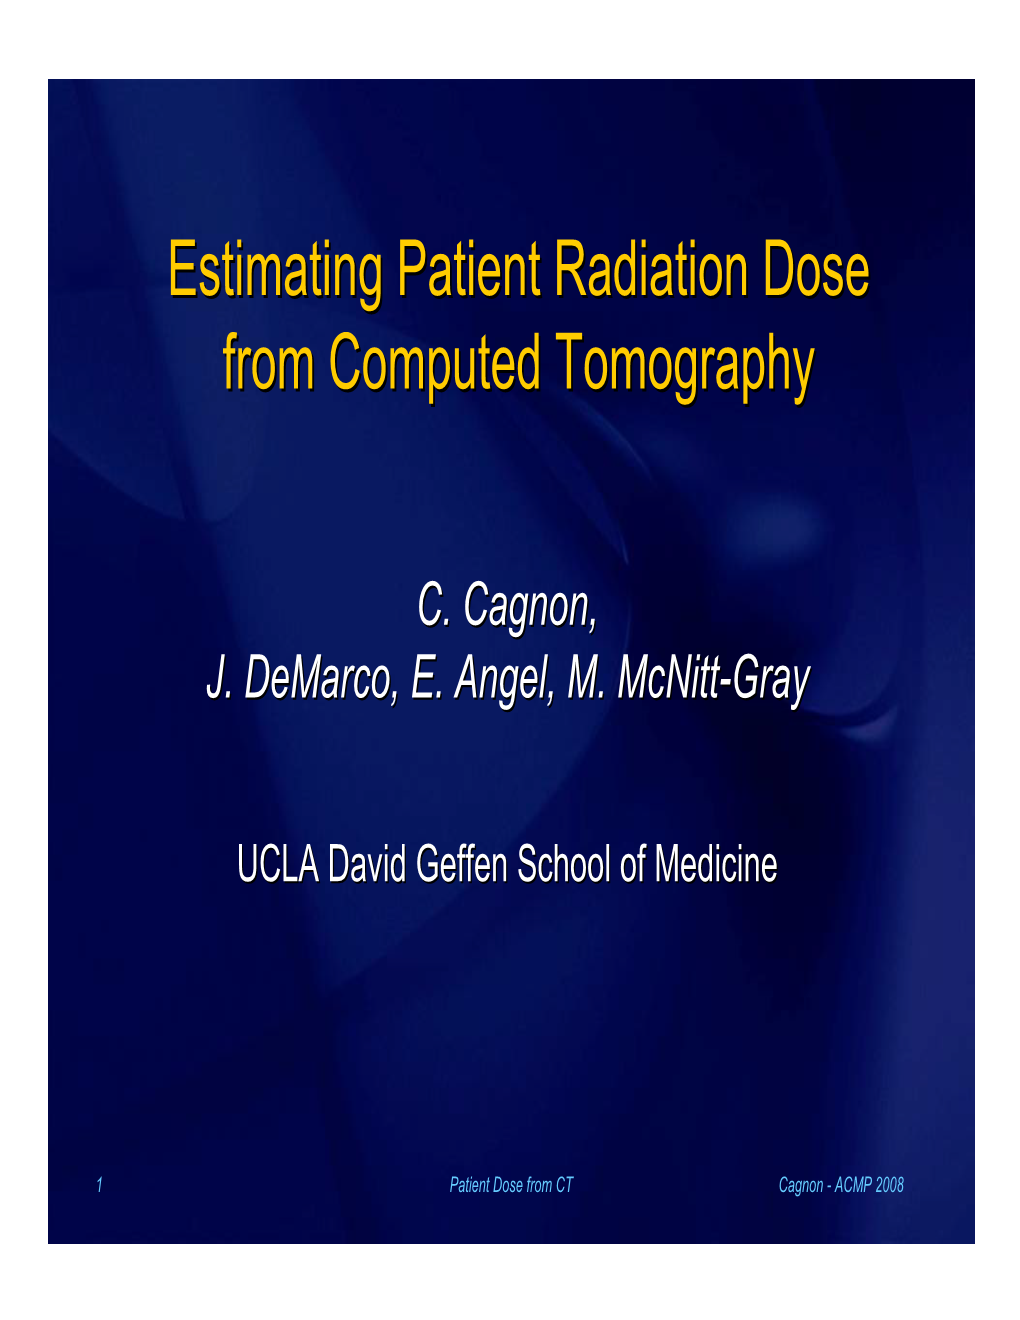 Estimating Patient Radiation Dose from Computed Tomography